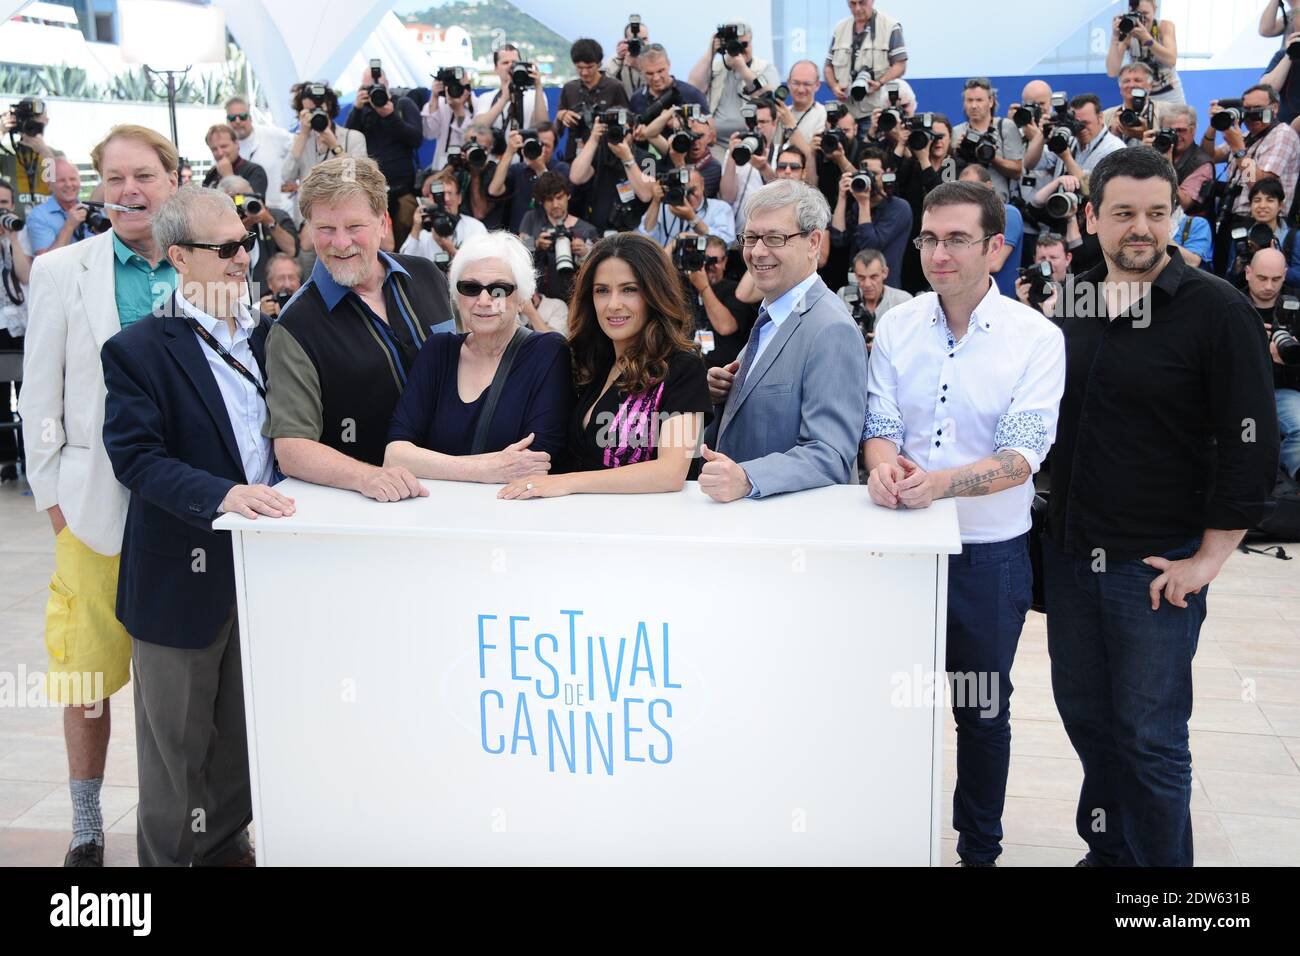 Salma Hayek, Roger Allers, Tomm Moore, Joan C Gratz, Joan Sfar, Bill Plympton, Paul Brizzi, Gaetan Brizzi posing at Homage To The Cinema D'Animation photocall held at the Palais Des Festivals in Cannes, France on May 17, 2014, as part of the 67th Cannes Film Festival. Photo by Aurore Marechal/ABACAPRESS.COM Stock Photo